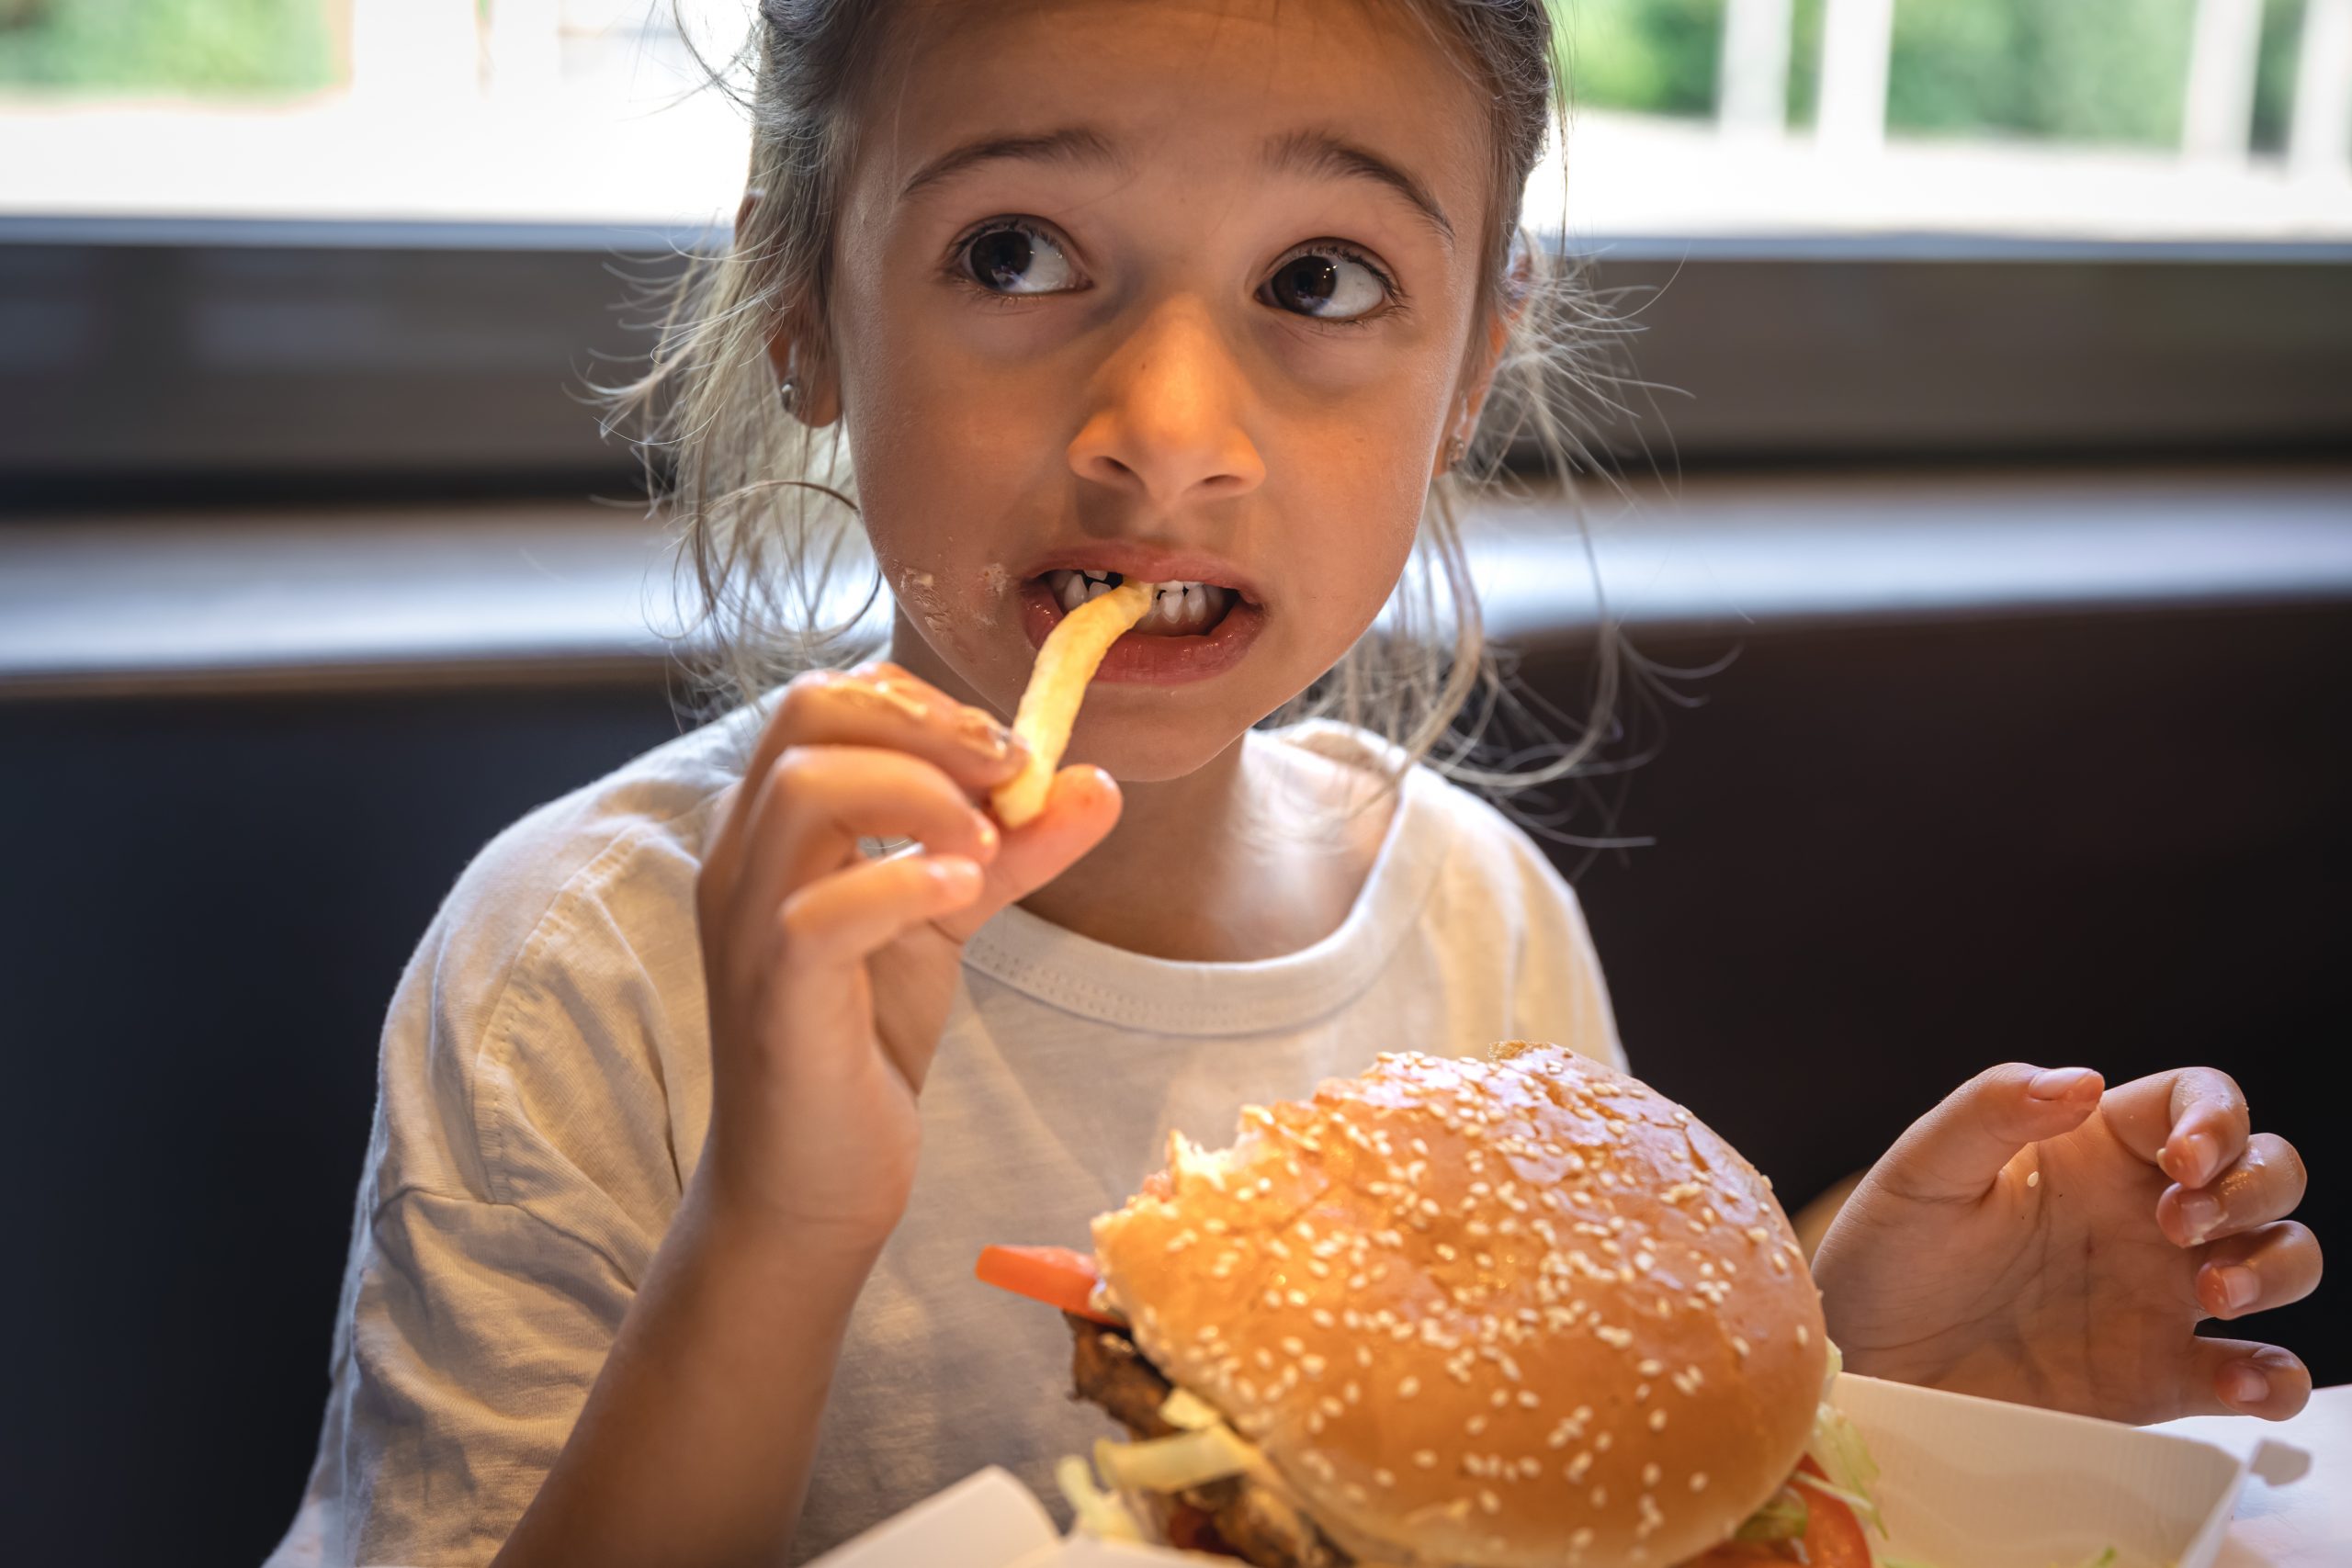 A little girl eats fast food in a cafe.